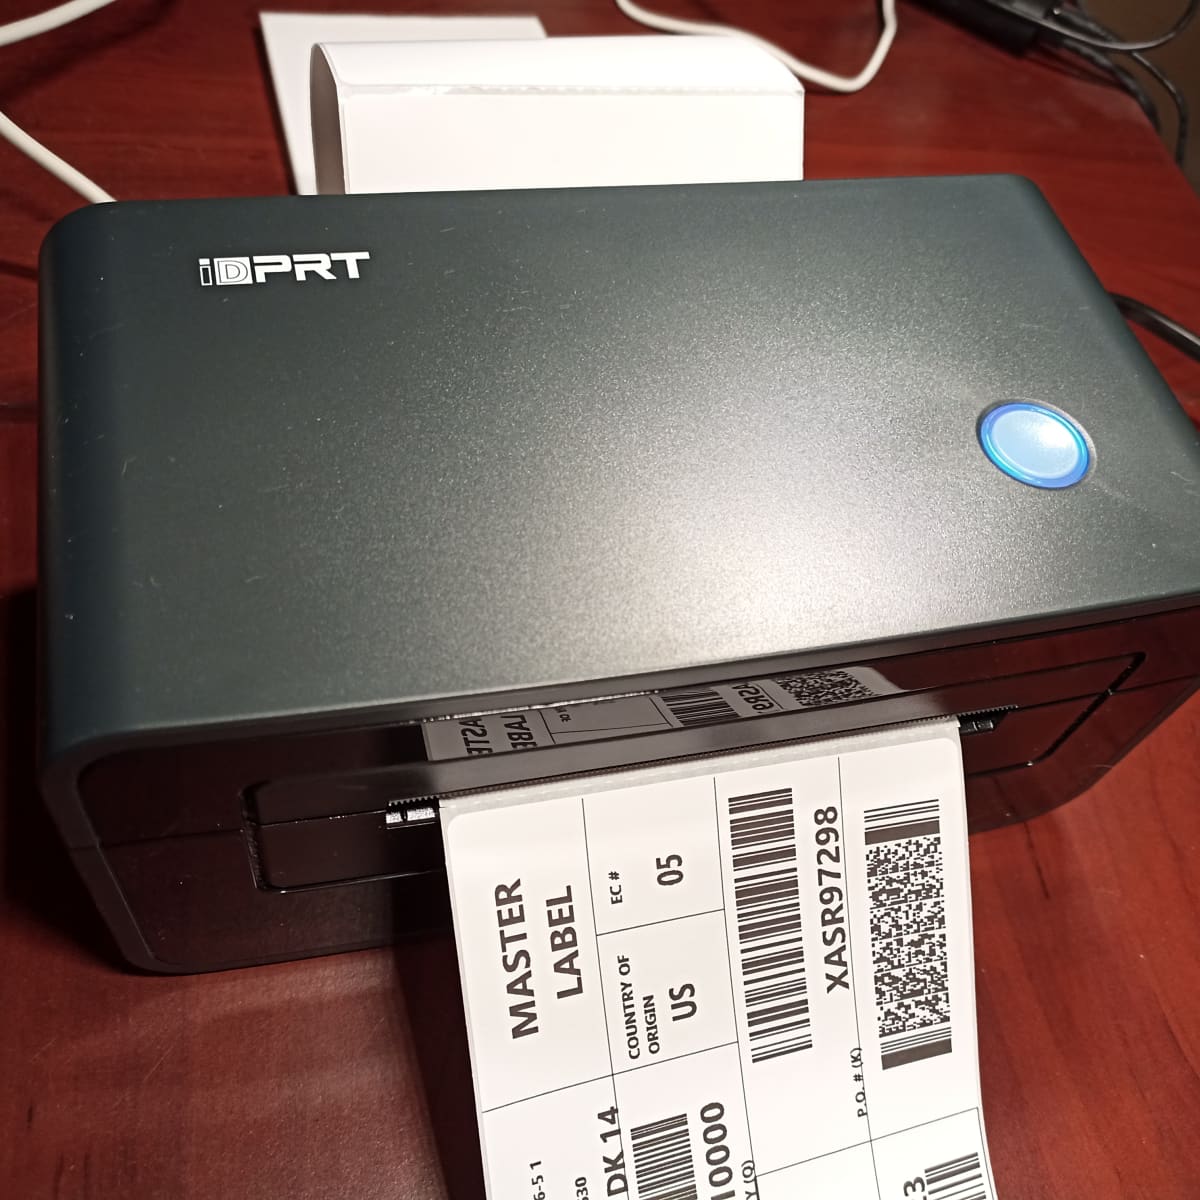 Review of the iDPRT SP410 Thermal Shipping Label - TurboFuture